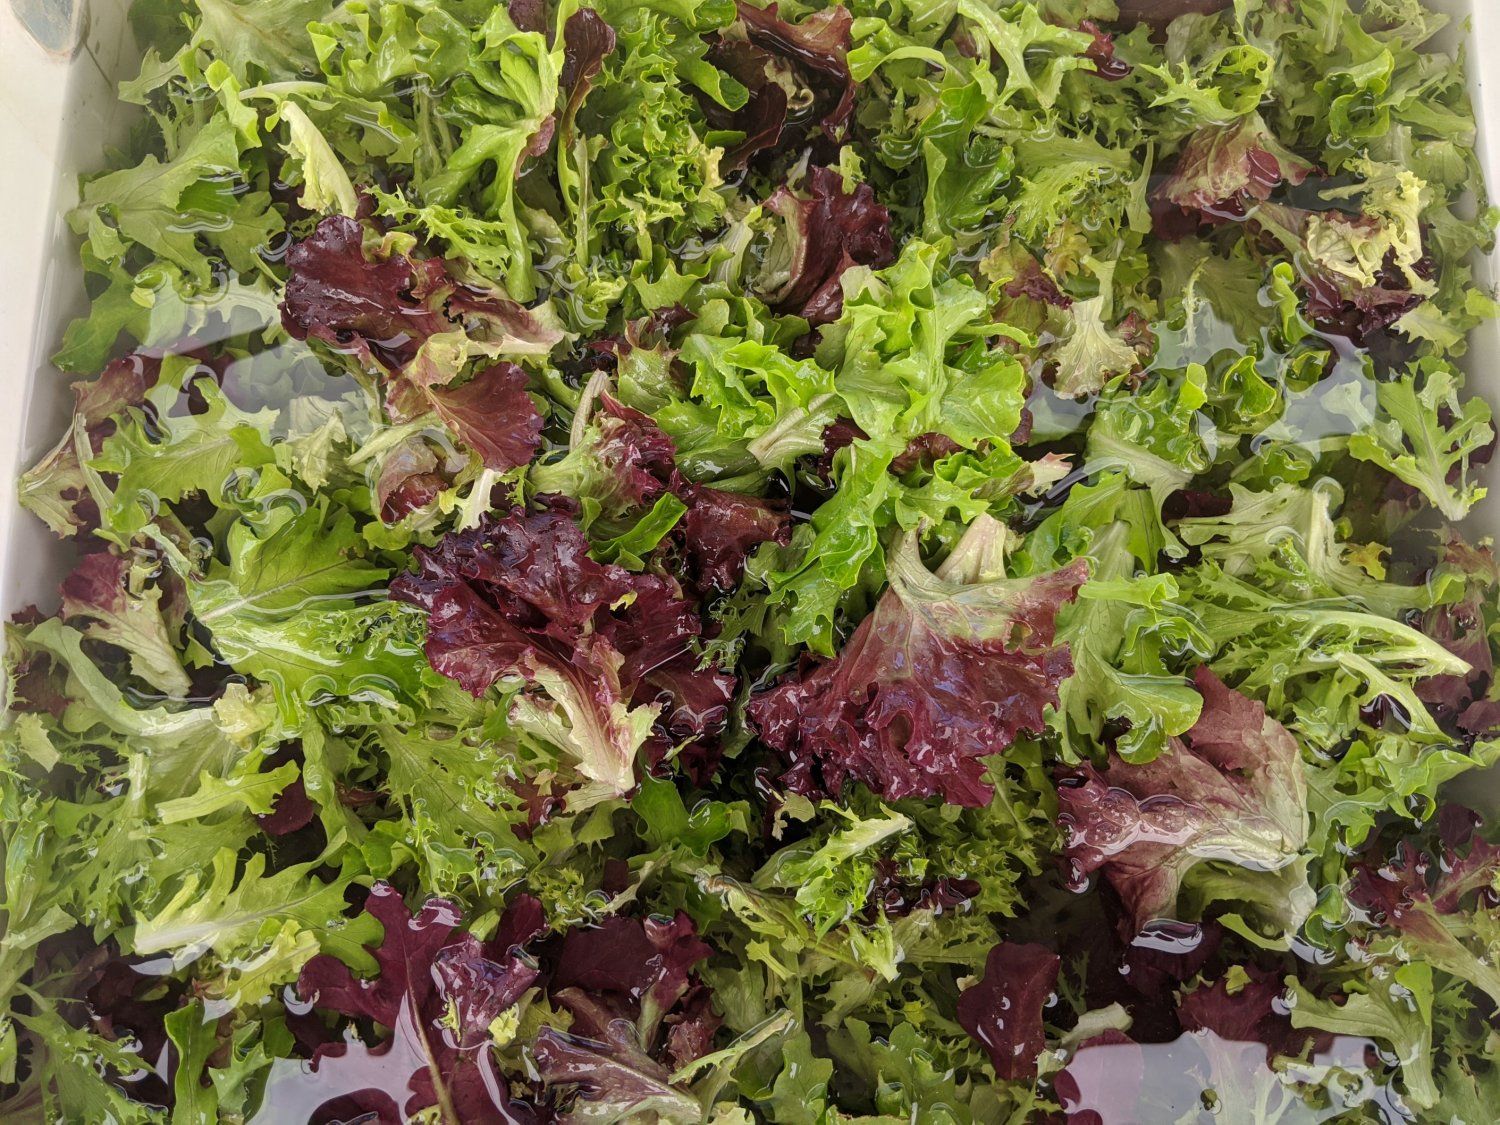 Previous Happening: Salad Mix Is Back!